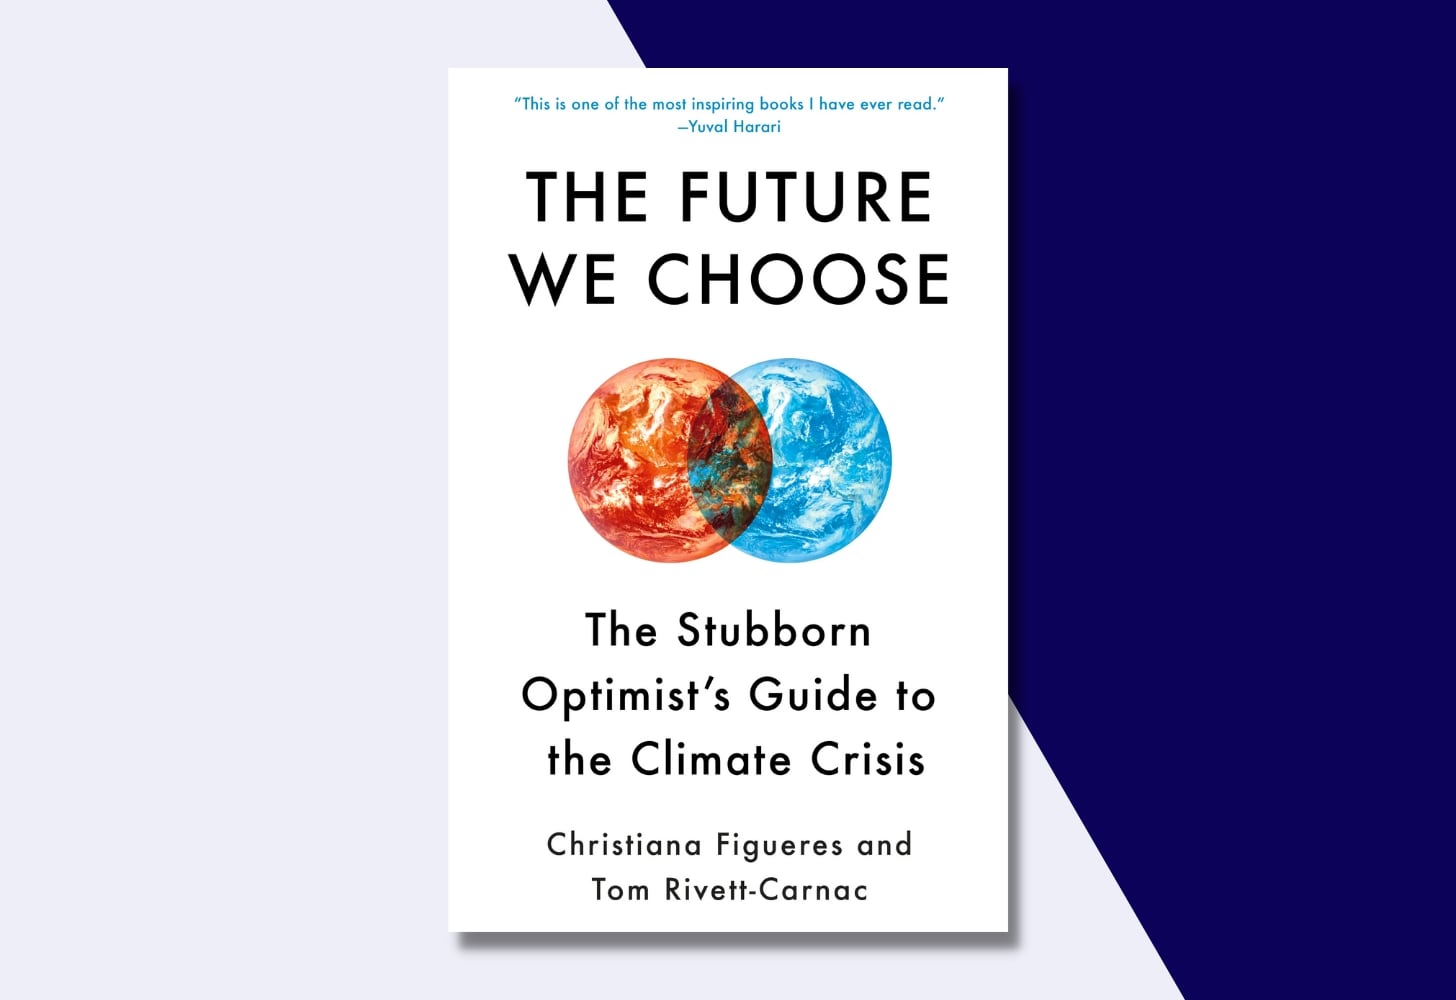 “The Future We Choose: The Stubborn Optimist’s Guide to the Climate Crisis” by Christiana Figueres and Tom Rivett-Carnac